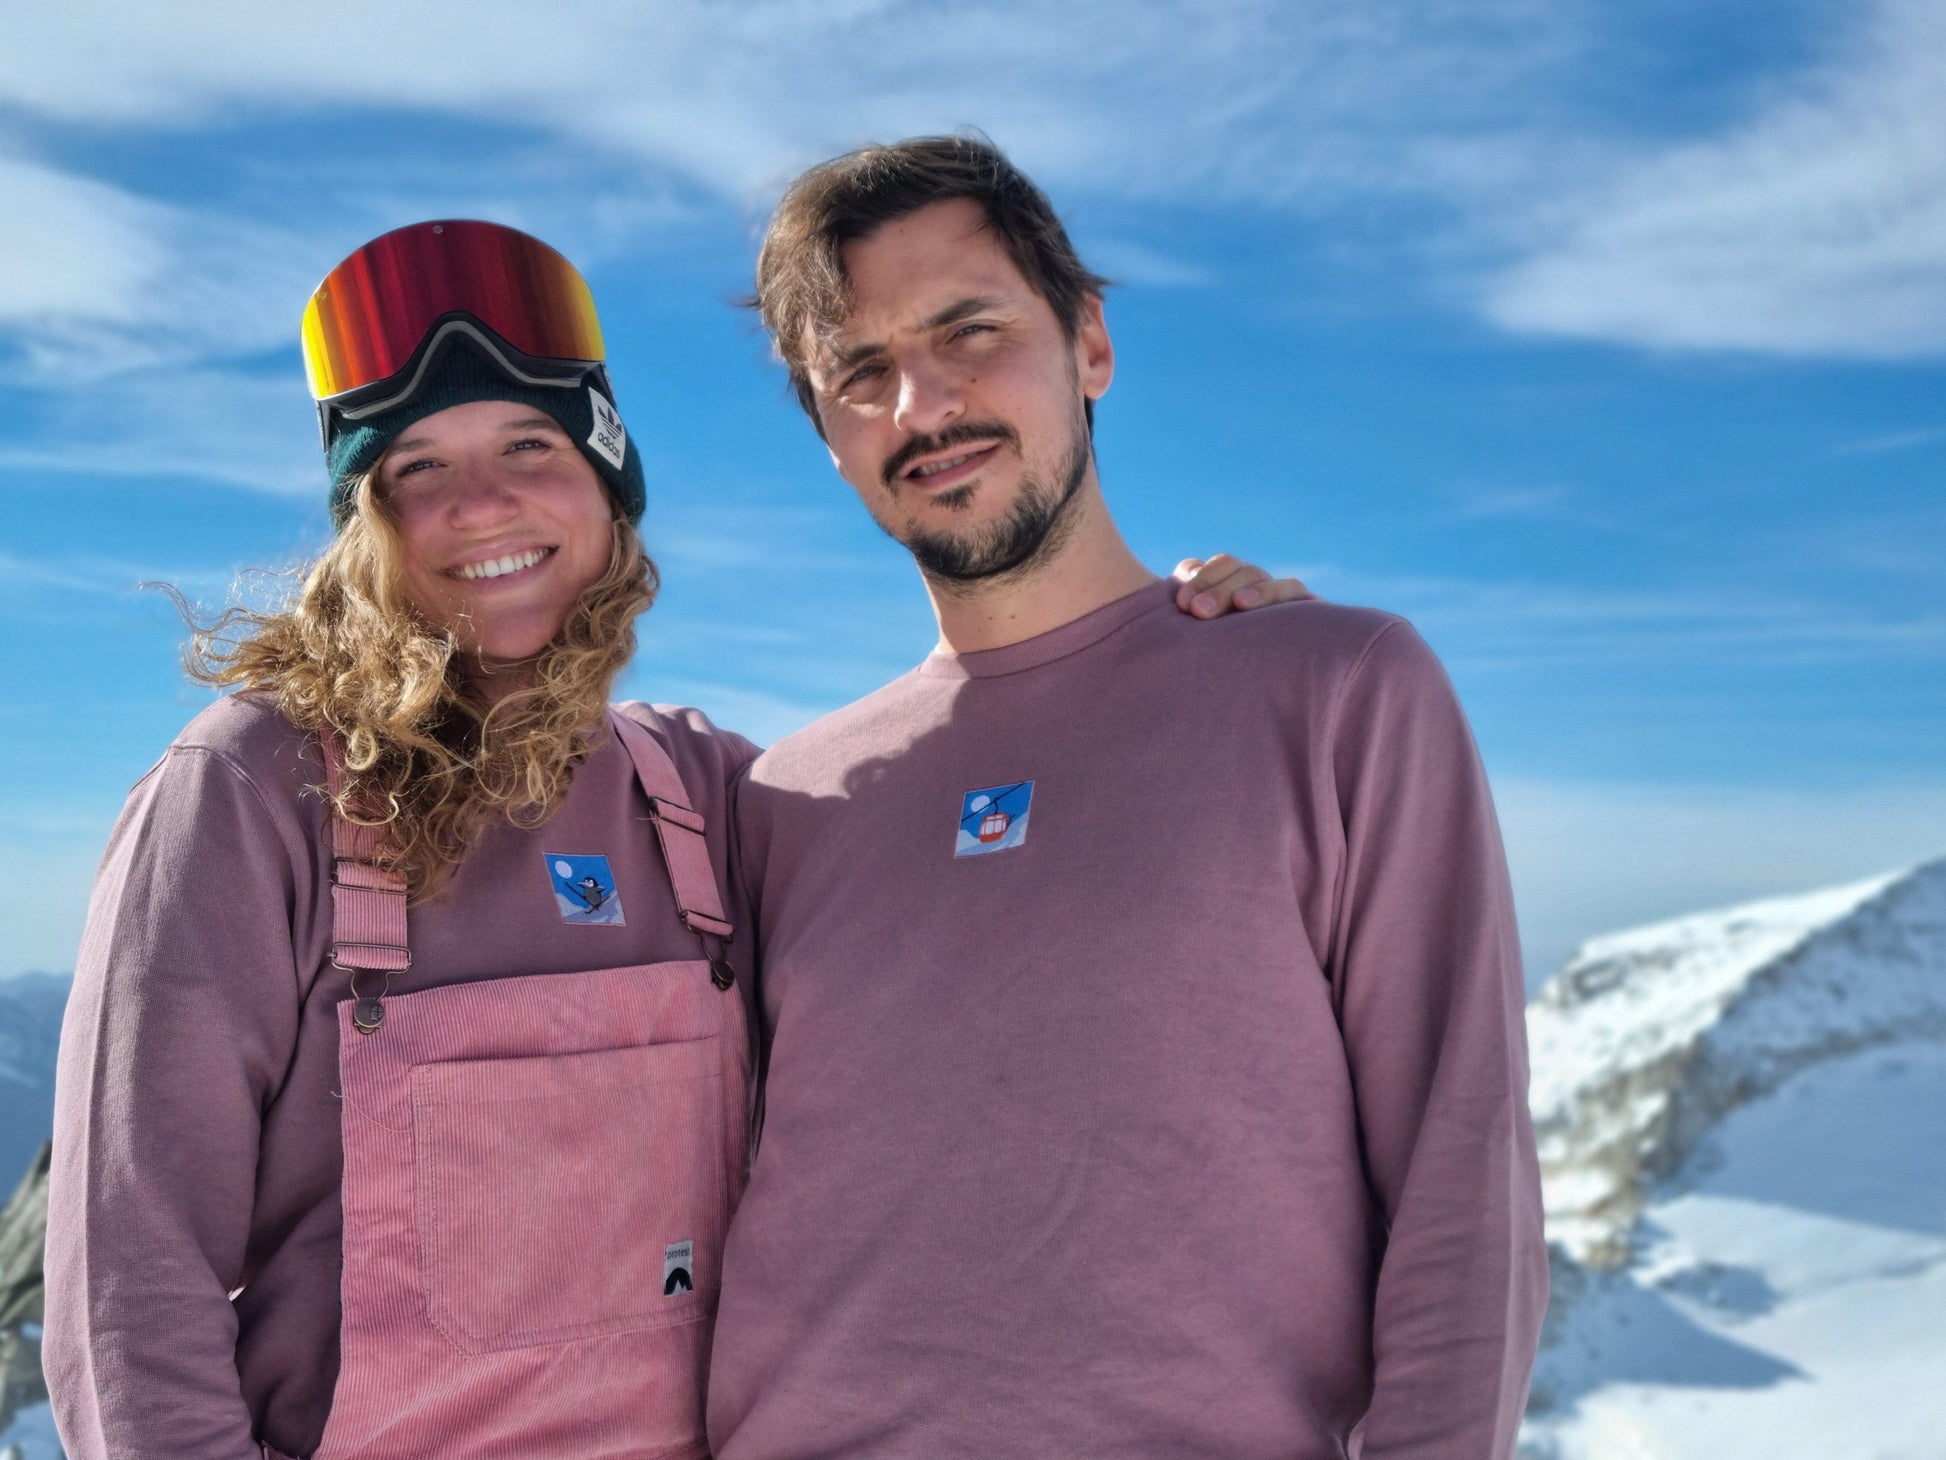 Hit the ski slopes with this unisex adult sweater with skilift embroidery. Twin with your family: we have kids & adults sizes available.